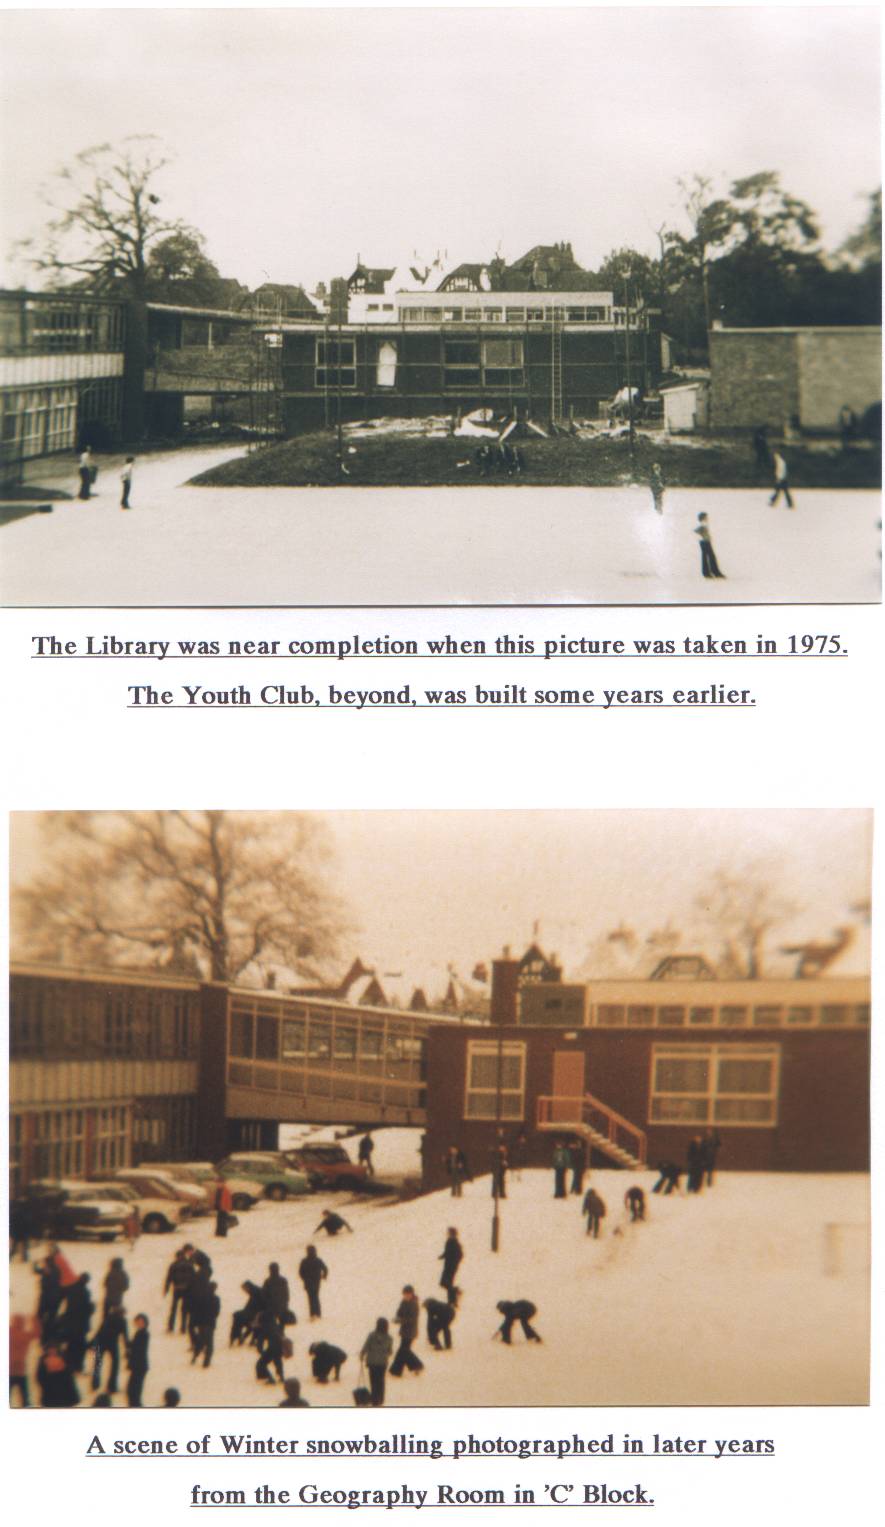 The Library was near completion when this picture was taken in 1975 The Youth Club, beyond, was built some years earlier. A scene of Winter snowballing photographed in later years from the Geography Room in 'C' Block.